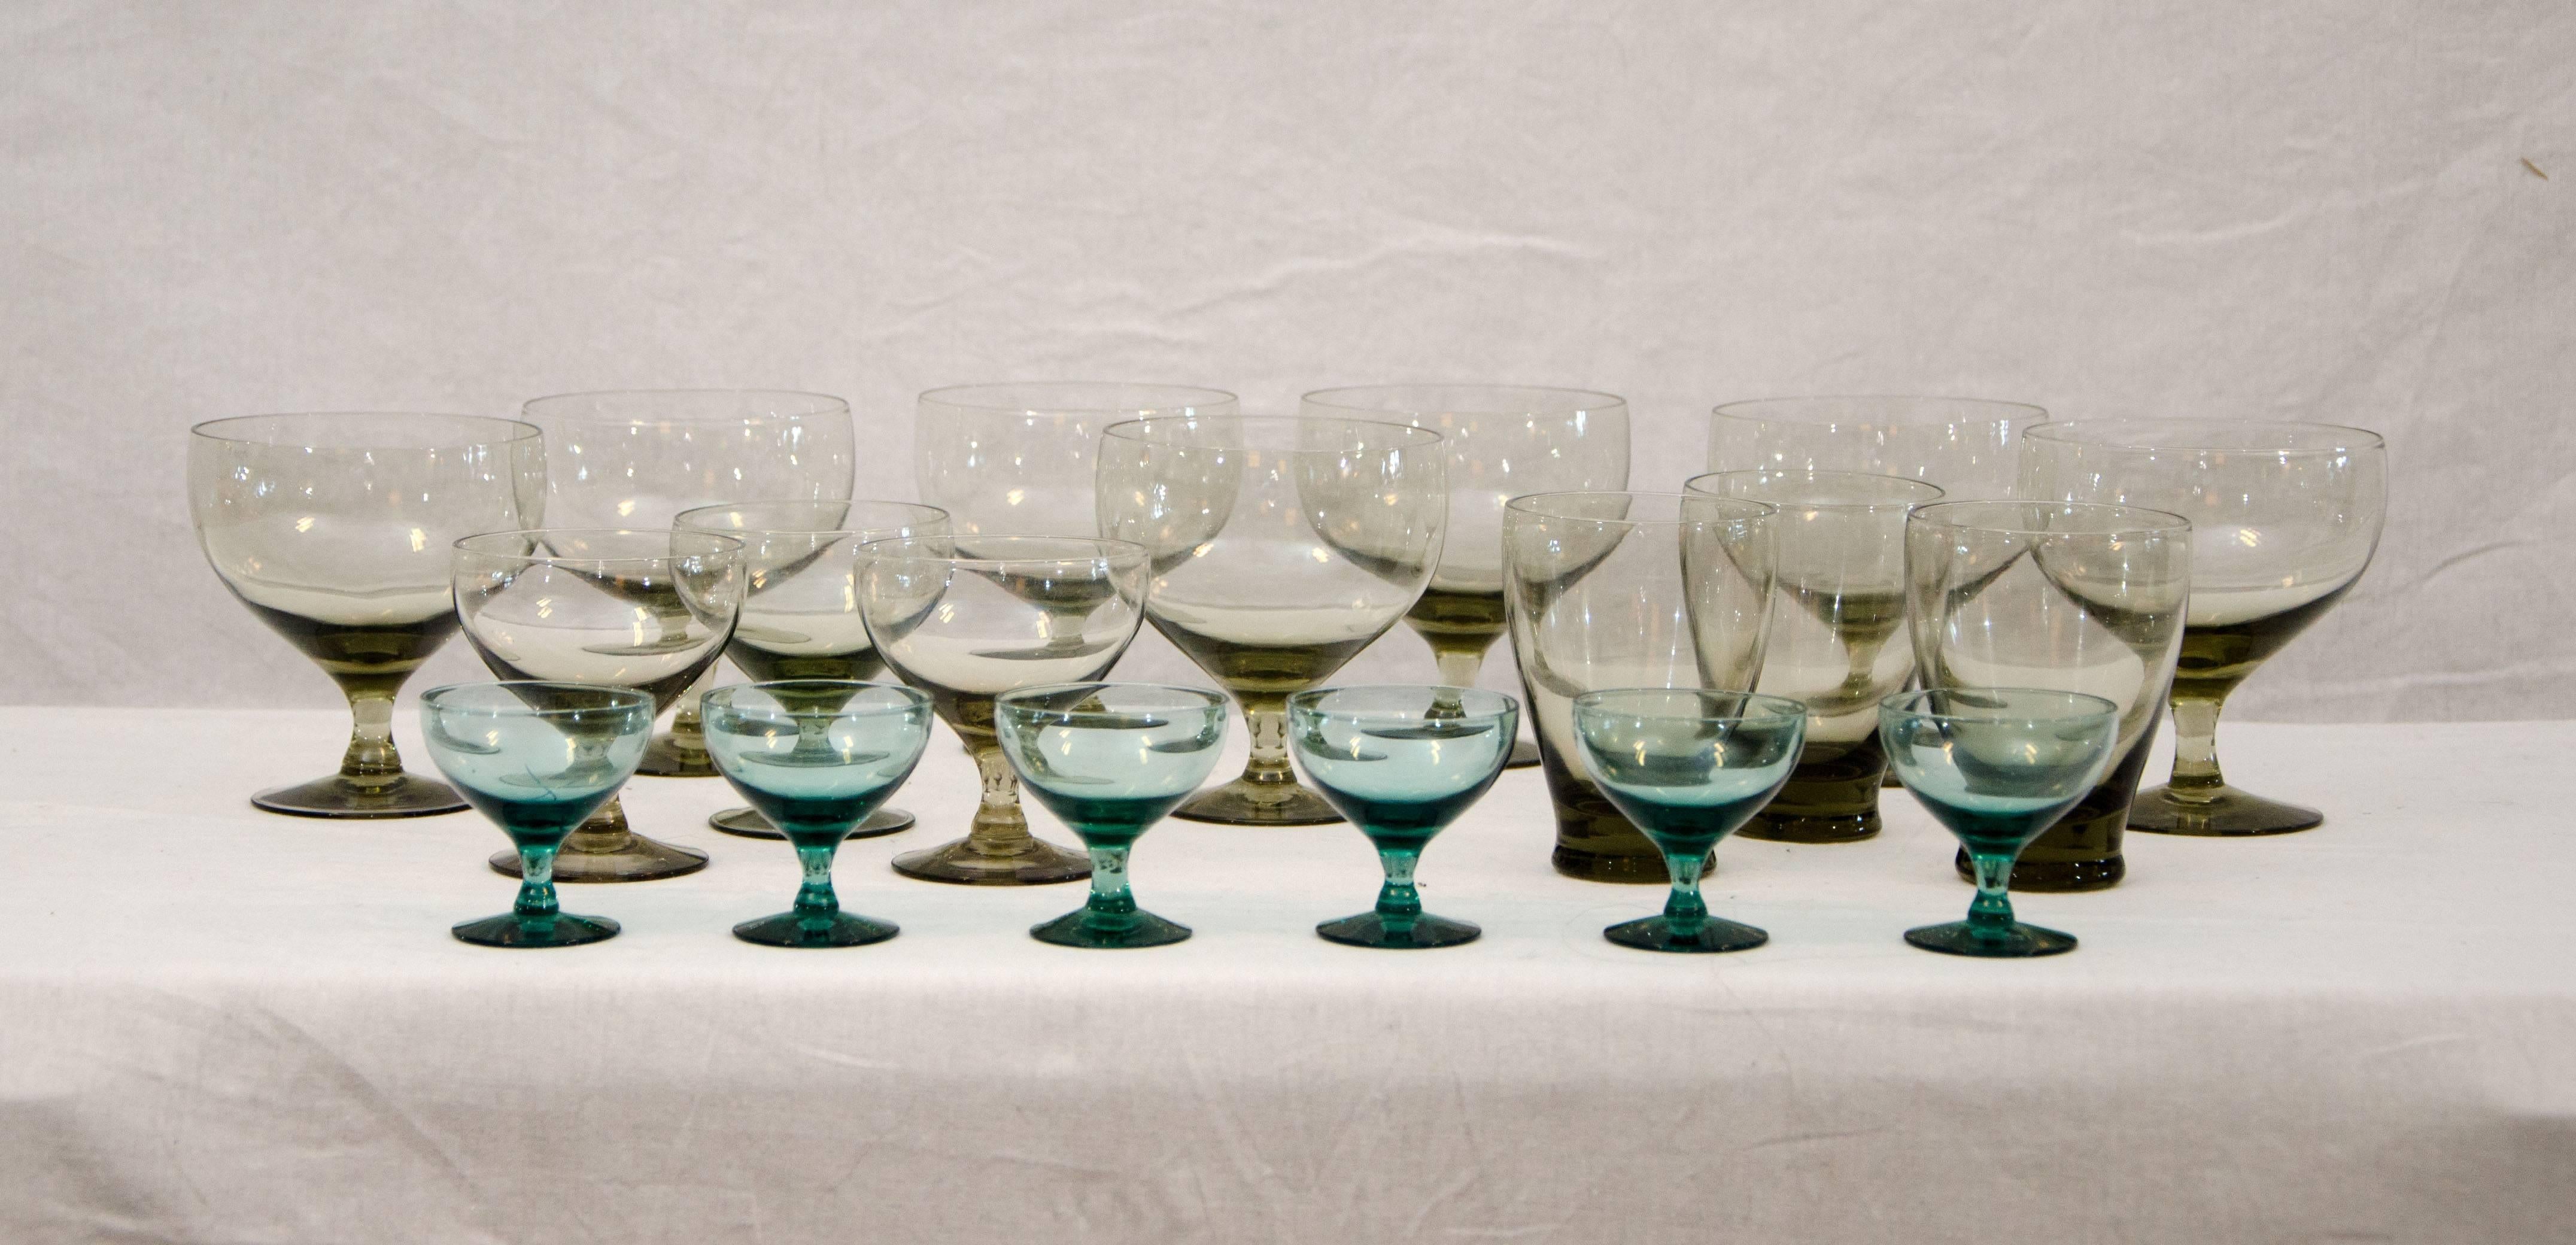 Small collection of Morgantown American glasses to add to or to start your modern collection.
7 Stem goblets (10 oz) smoke color, 4